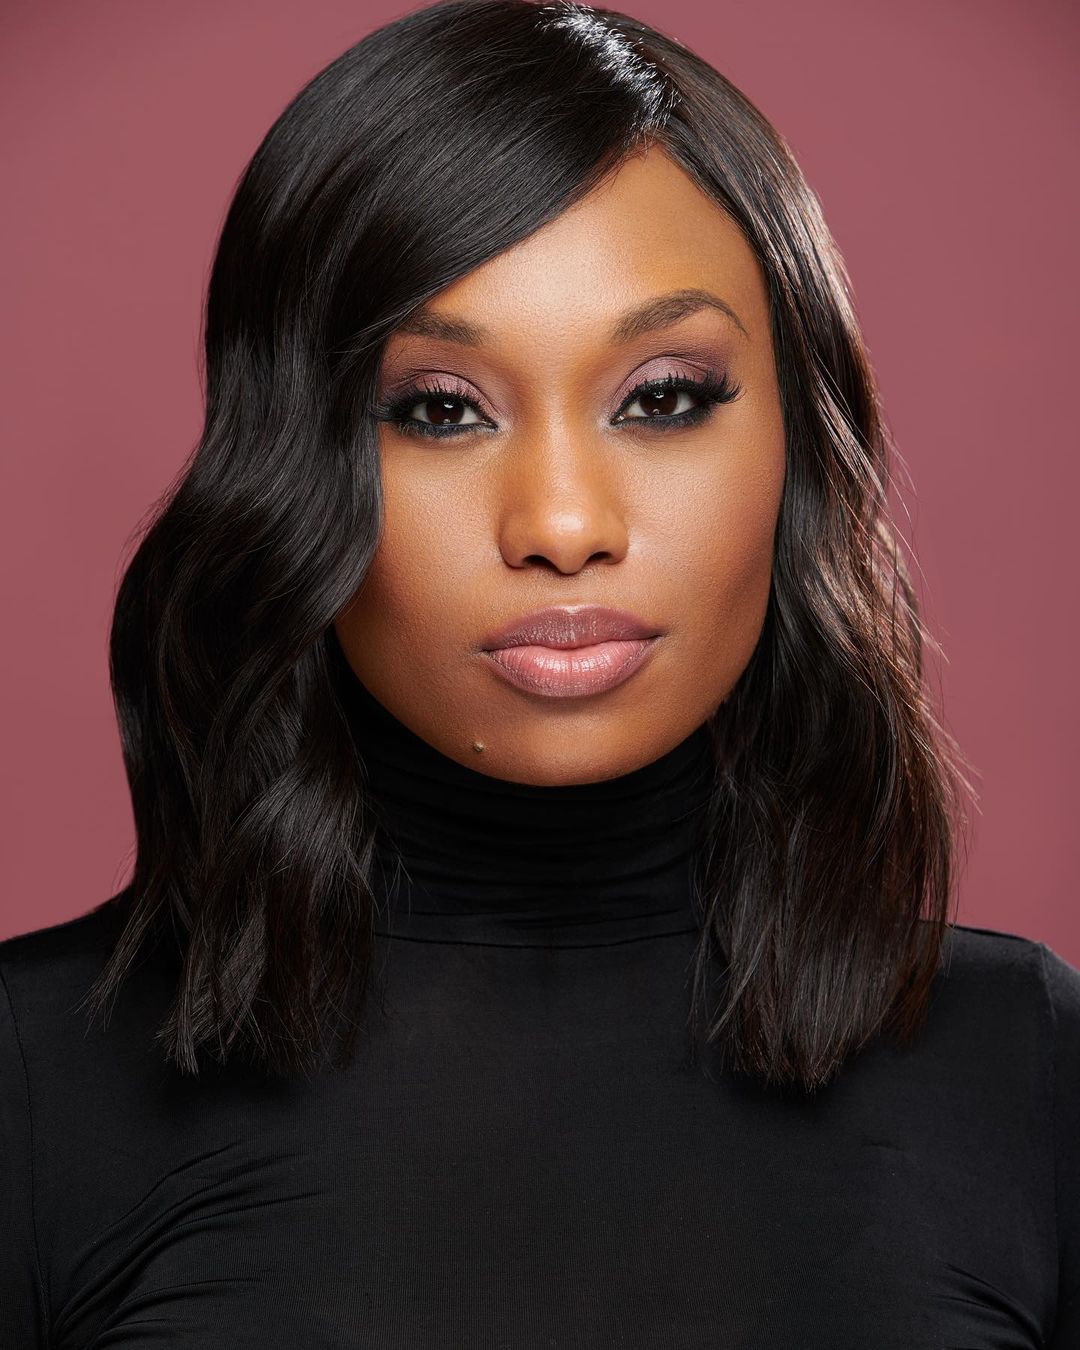 , Angell Conwell Biography, Age, Images, Height, Figure, Net Worth